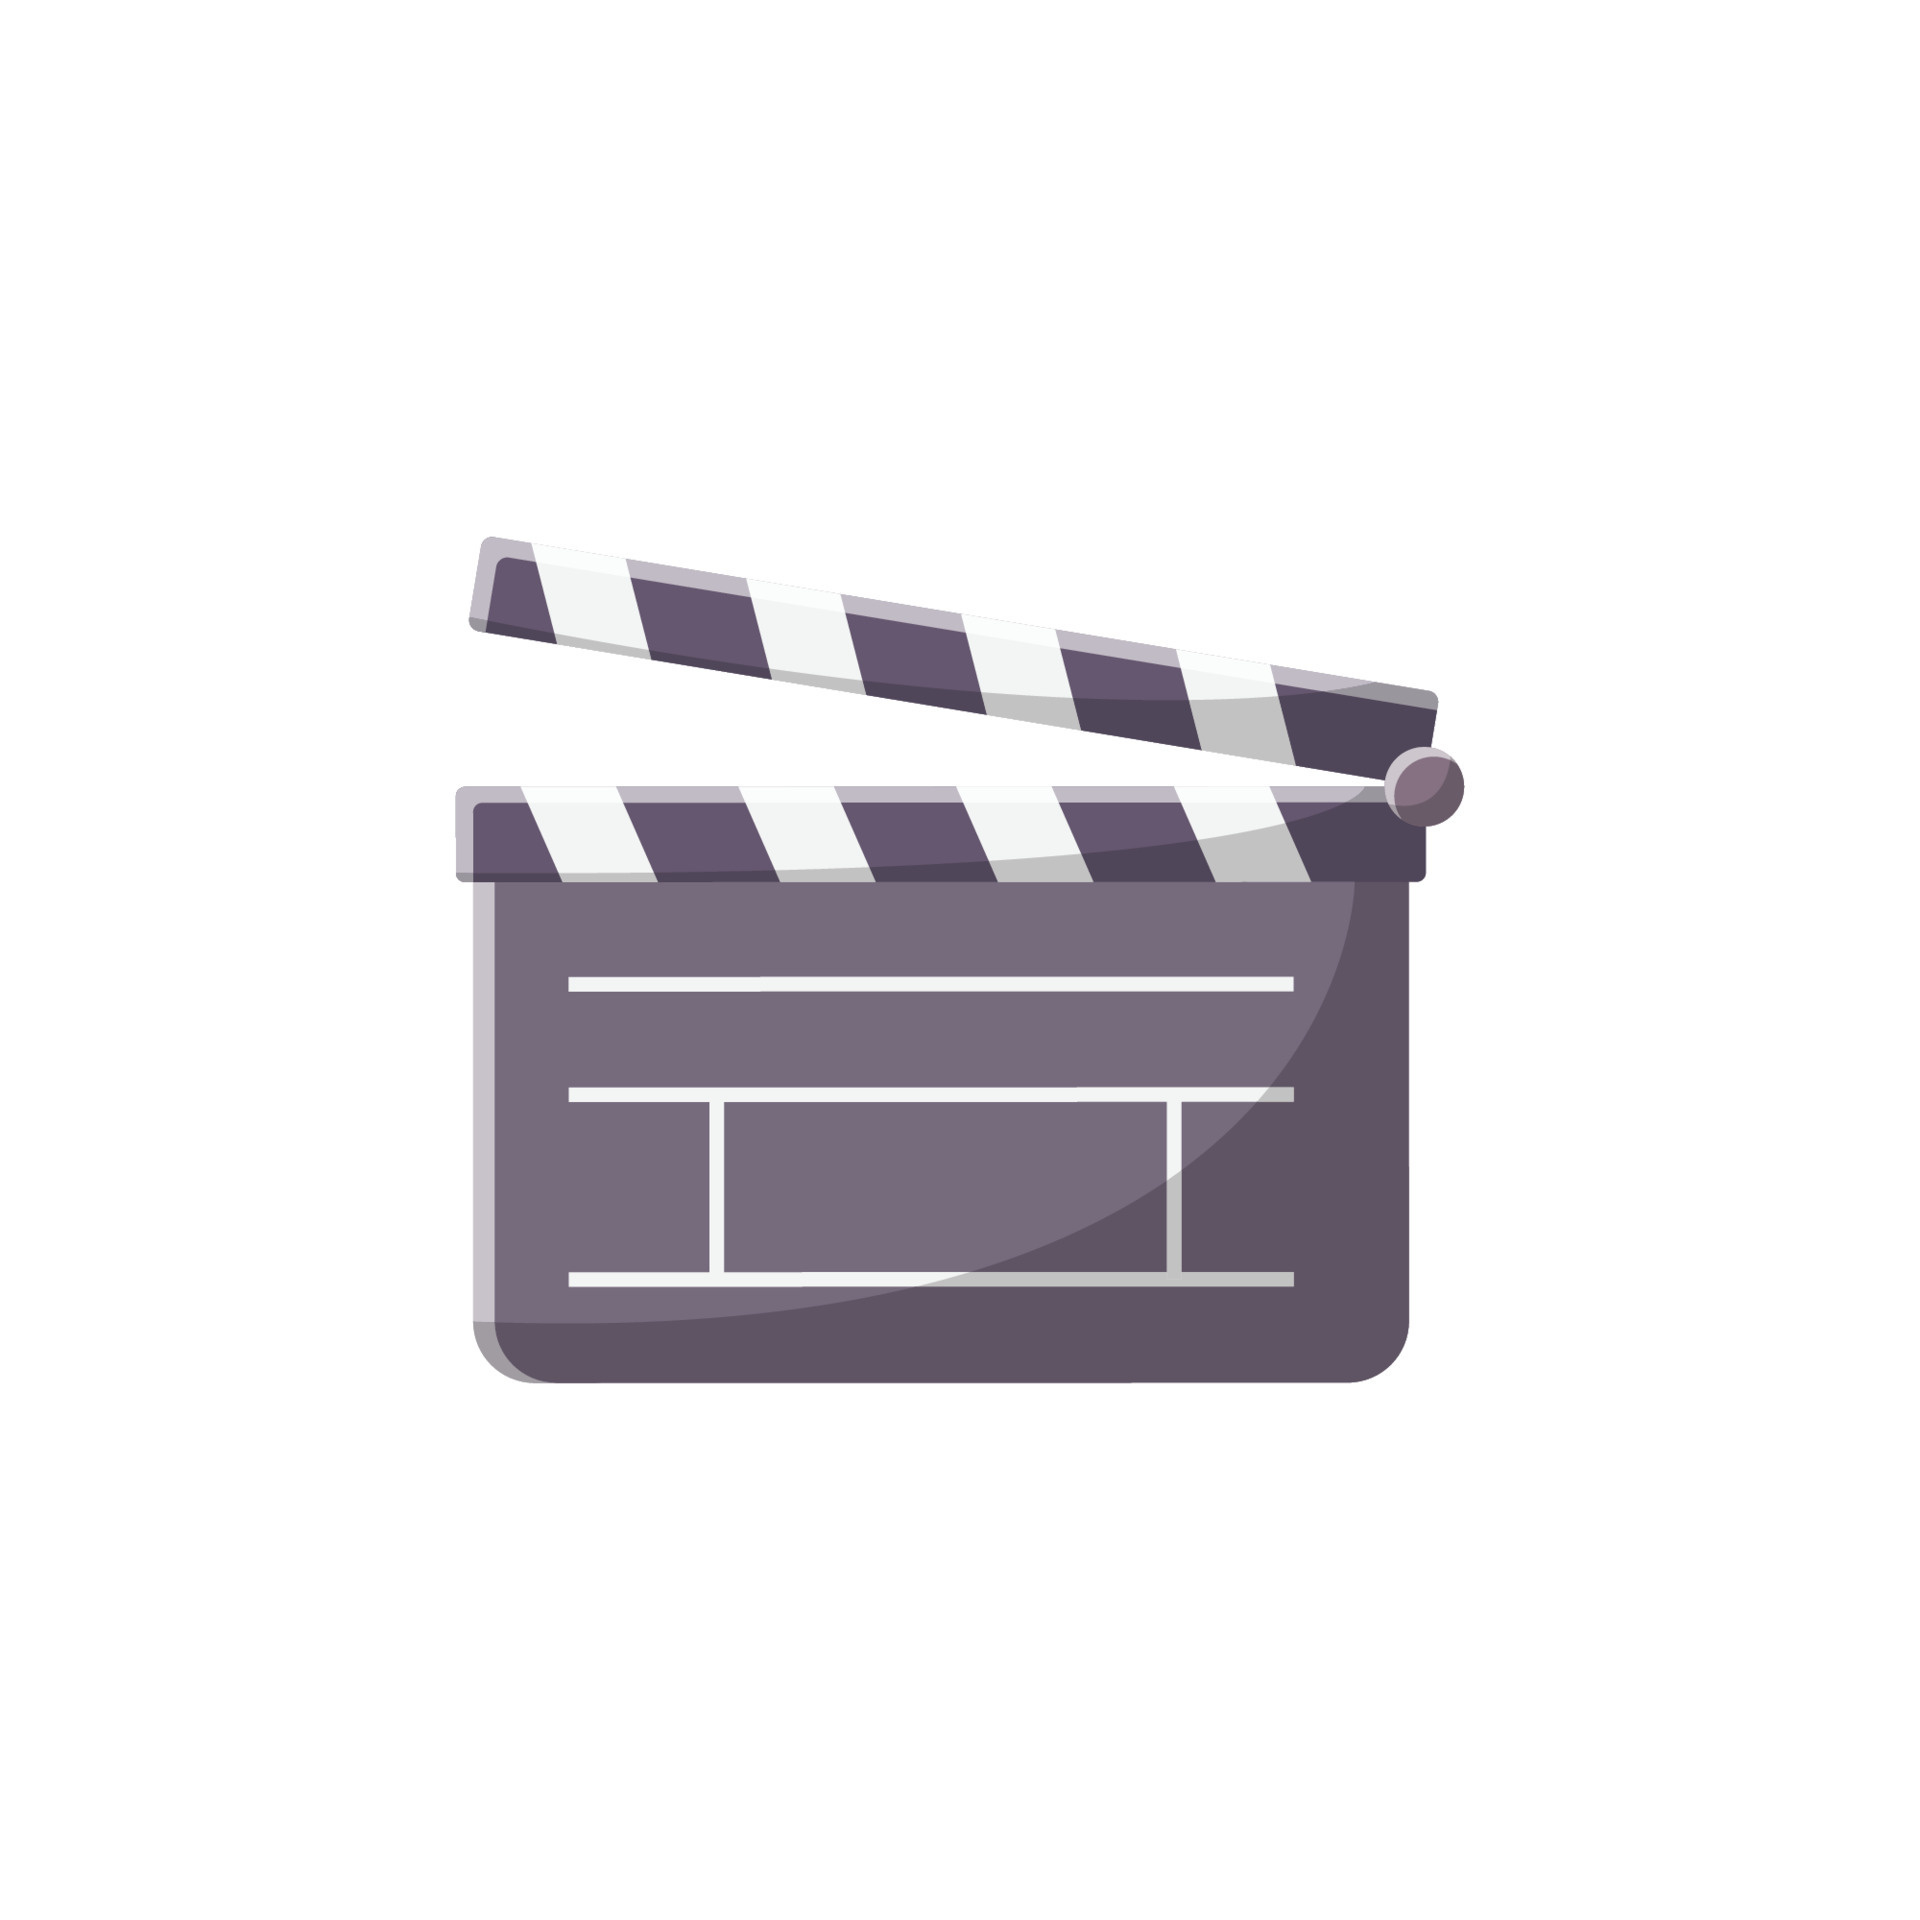 Clapperboard illustration, Clean icon design, Isolated white background, 1920x1920 HD Handy